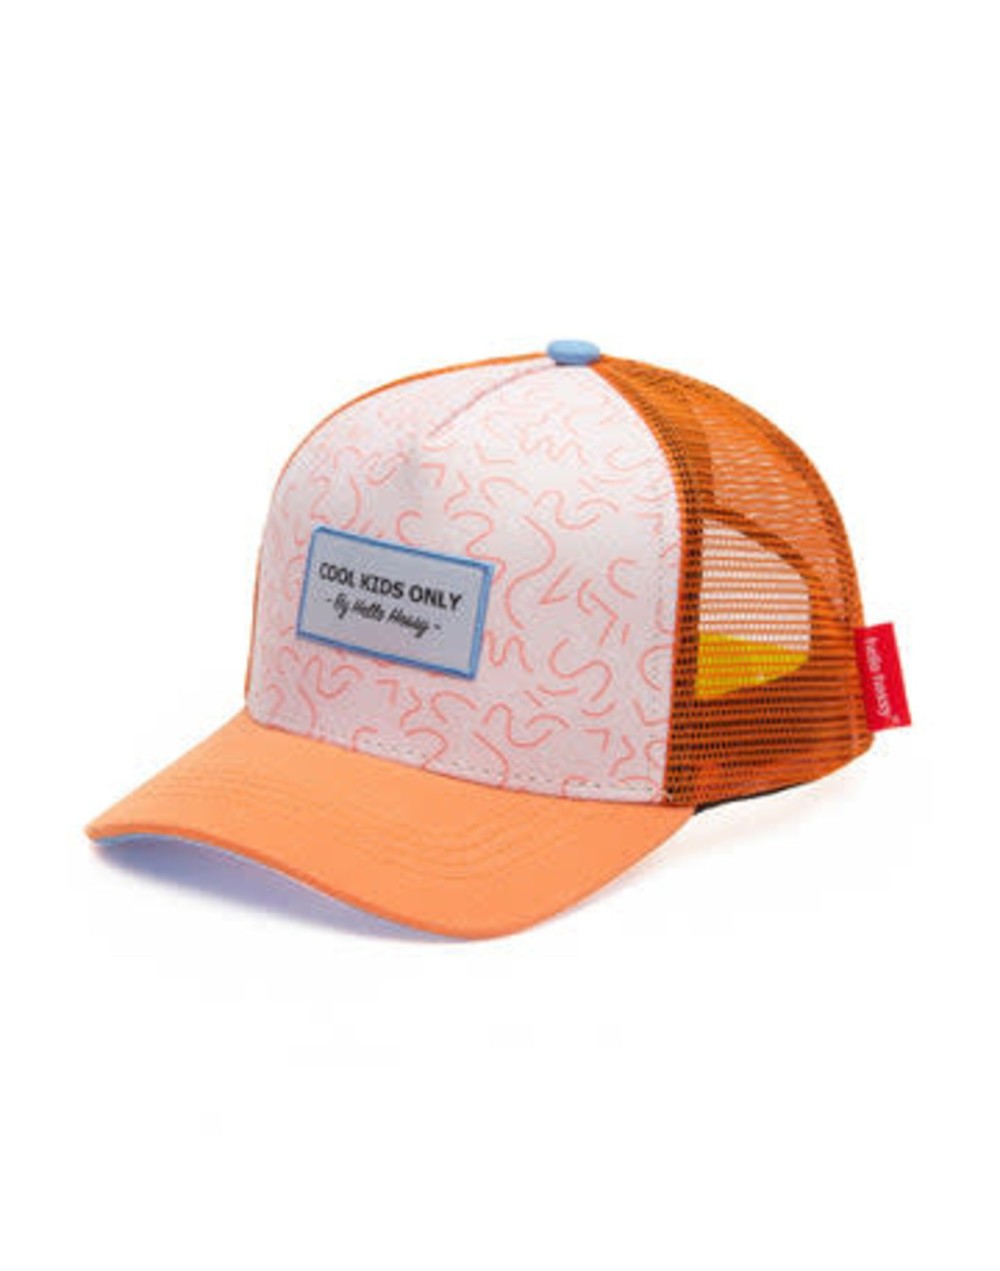 Casquette ginger 6ans+...